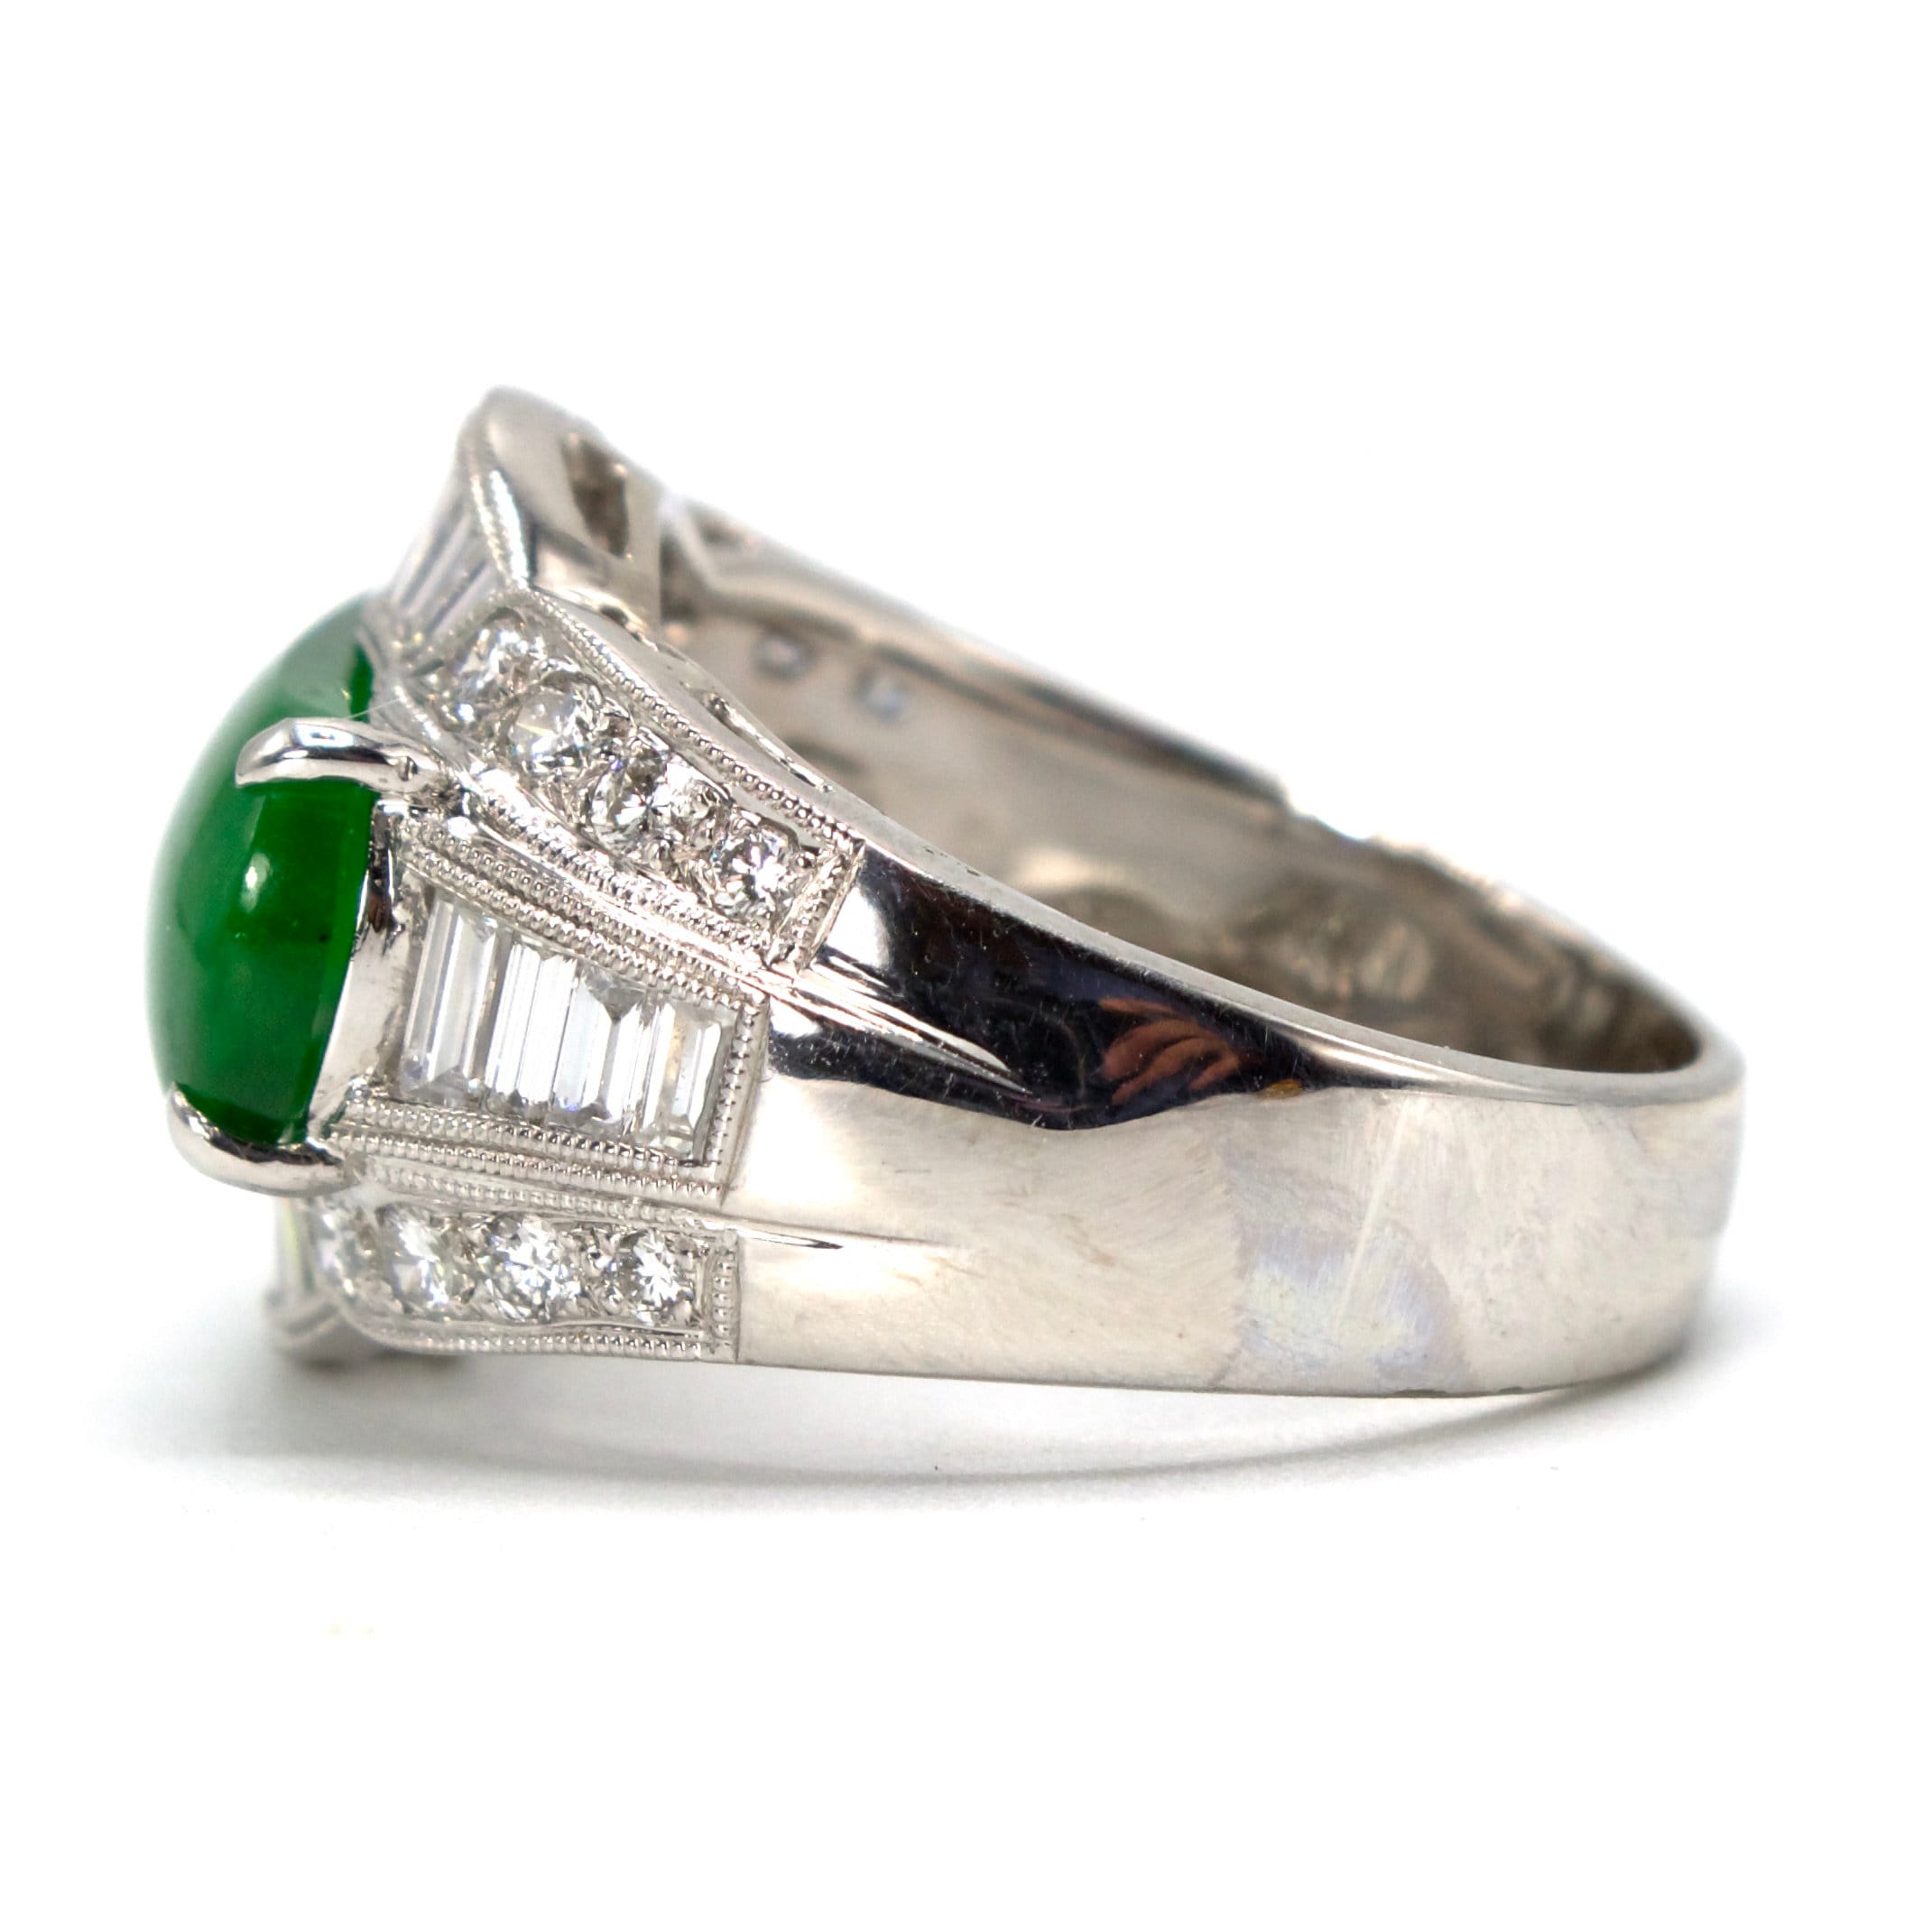 GIA 3.95 Carats Fine Green Natural A Jade with Diamonds in 18K White Gold Ring